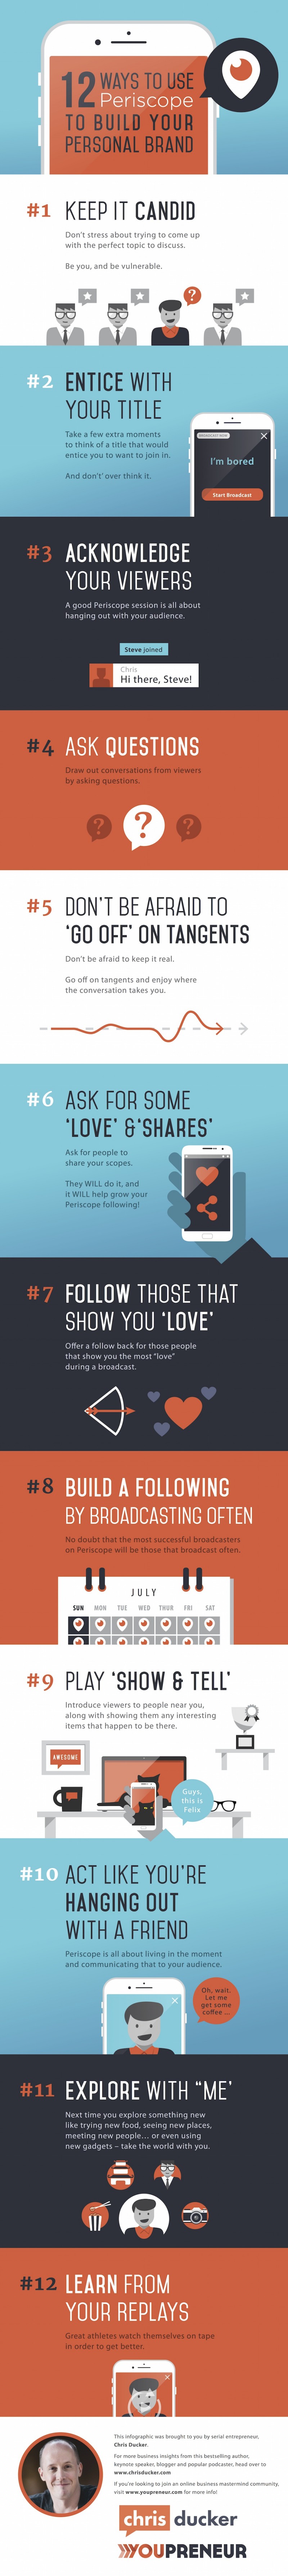 Infographie 284 - Periscope personal branding